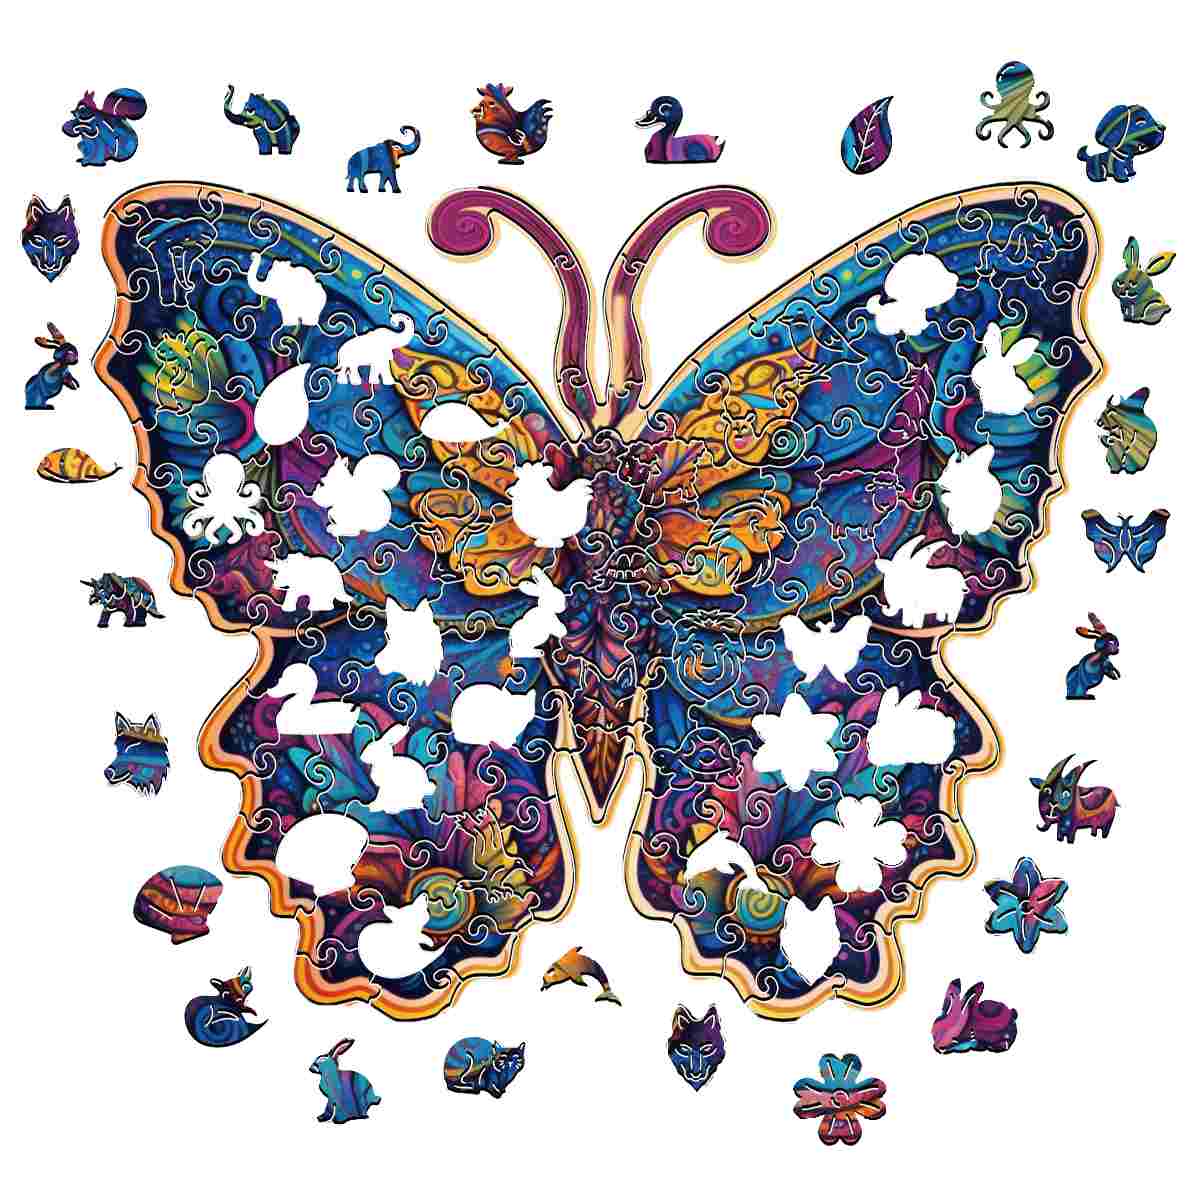 Animal Jigsaw Puzzle > Wooden Jigsaw Puzzle > Jigsaw Puzzle Galaxy Butterfly - Jigsaw Puzzle